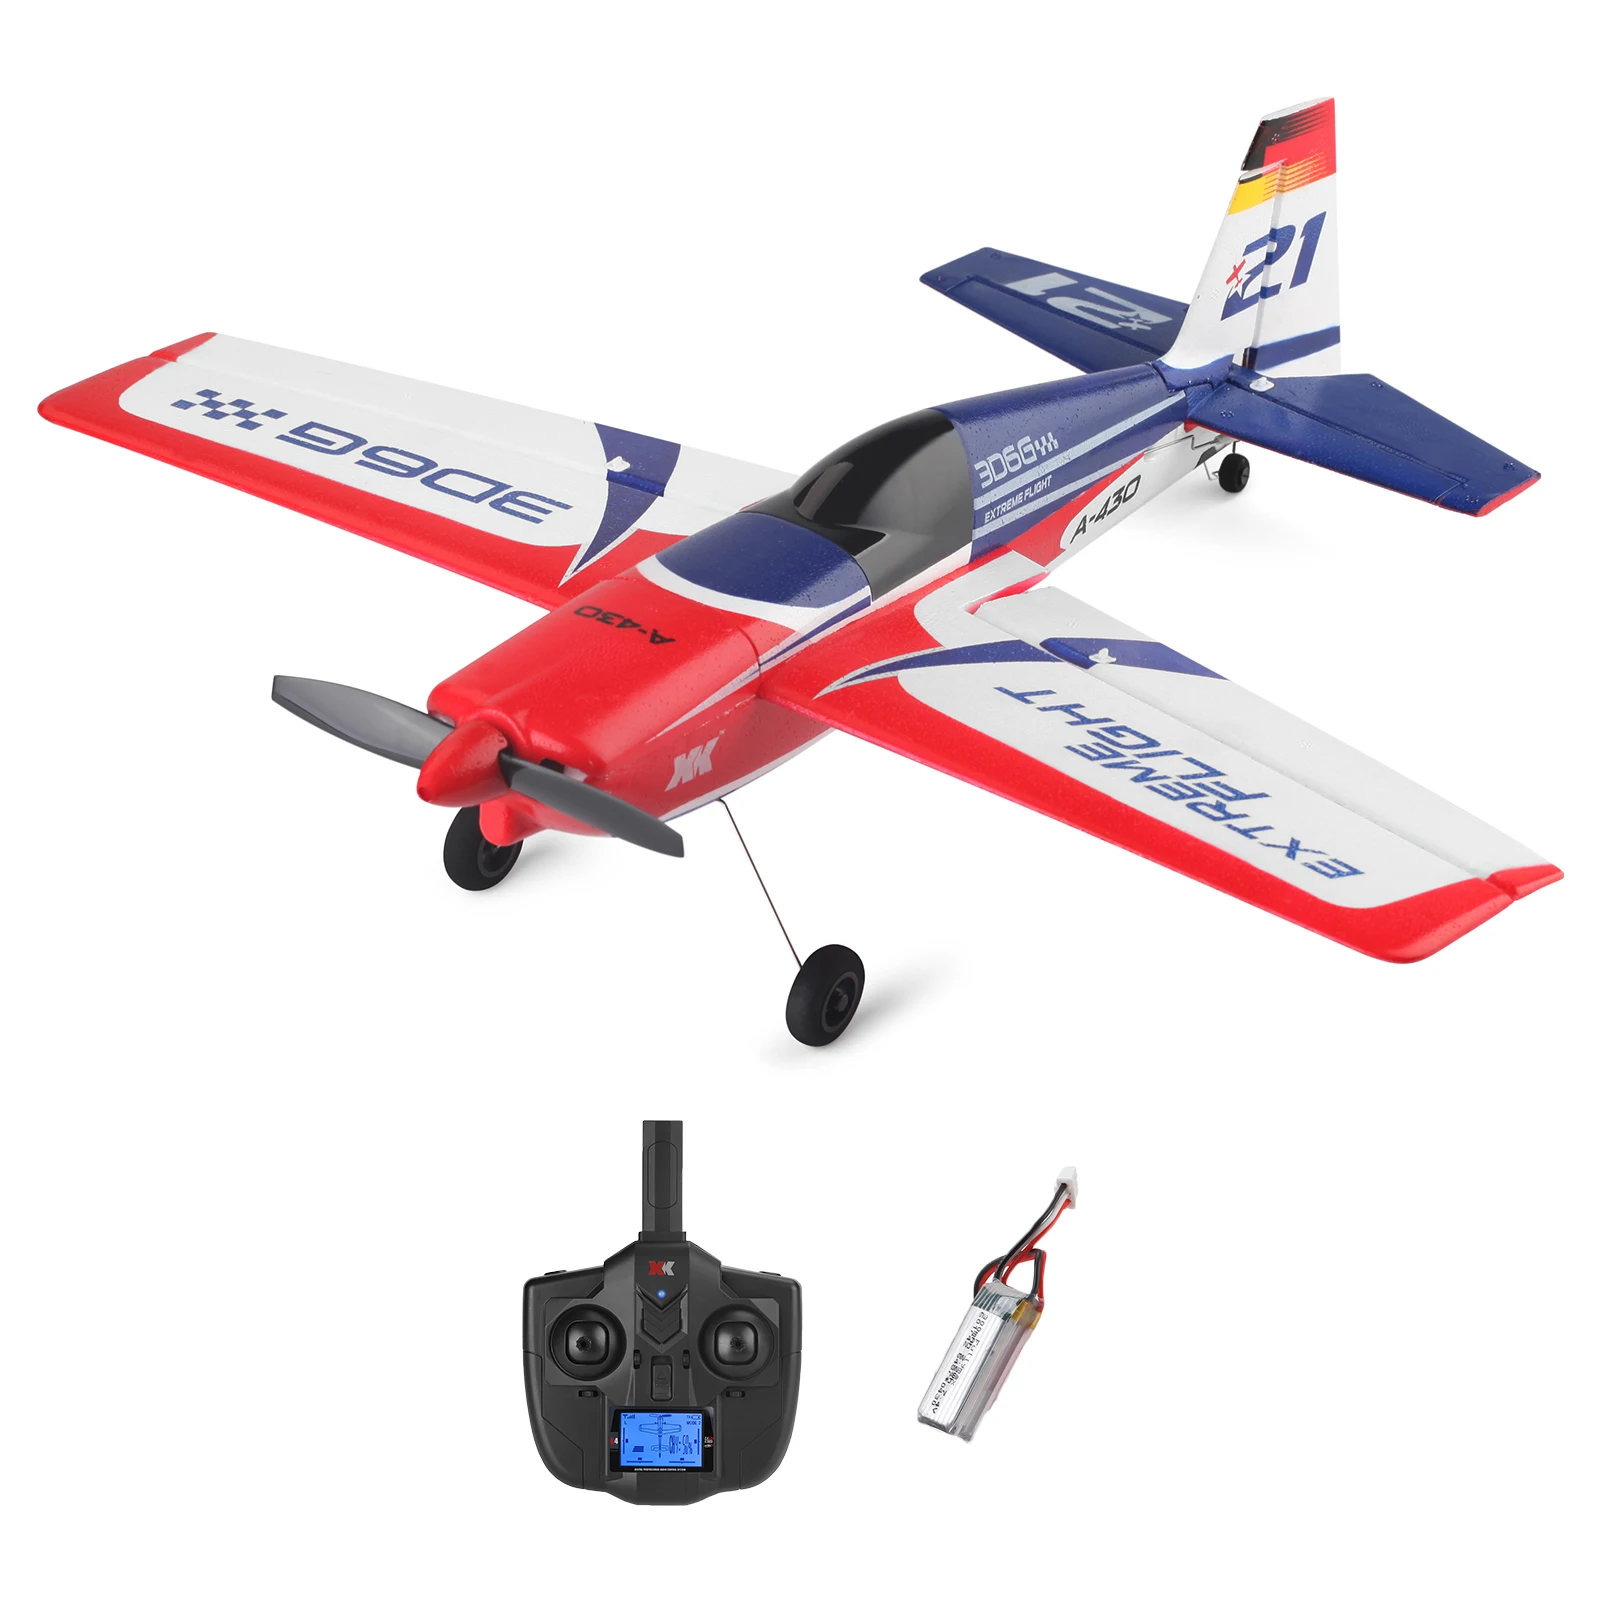 WLtoys XK A430 RC Plane 3D Modes 5CH Brushless Motor Easy to Fly Electric Remote Control Aircraft Toys